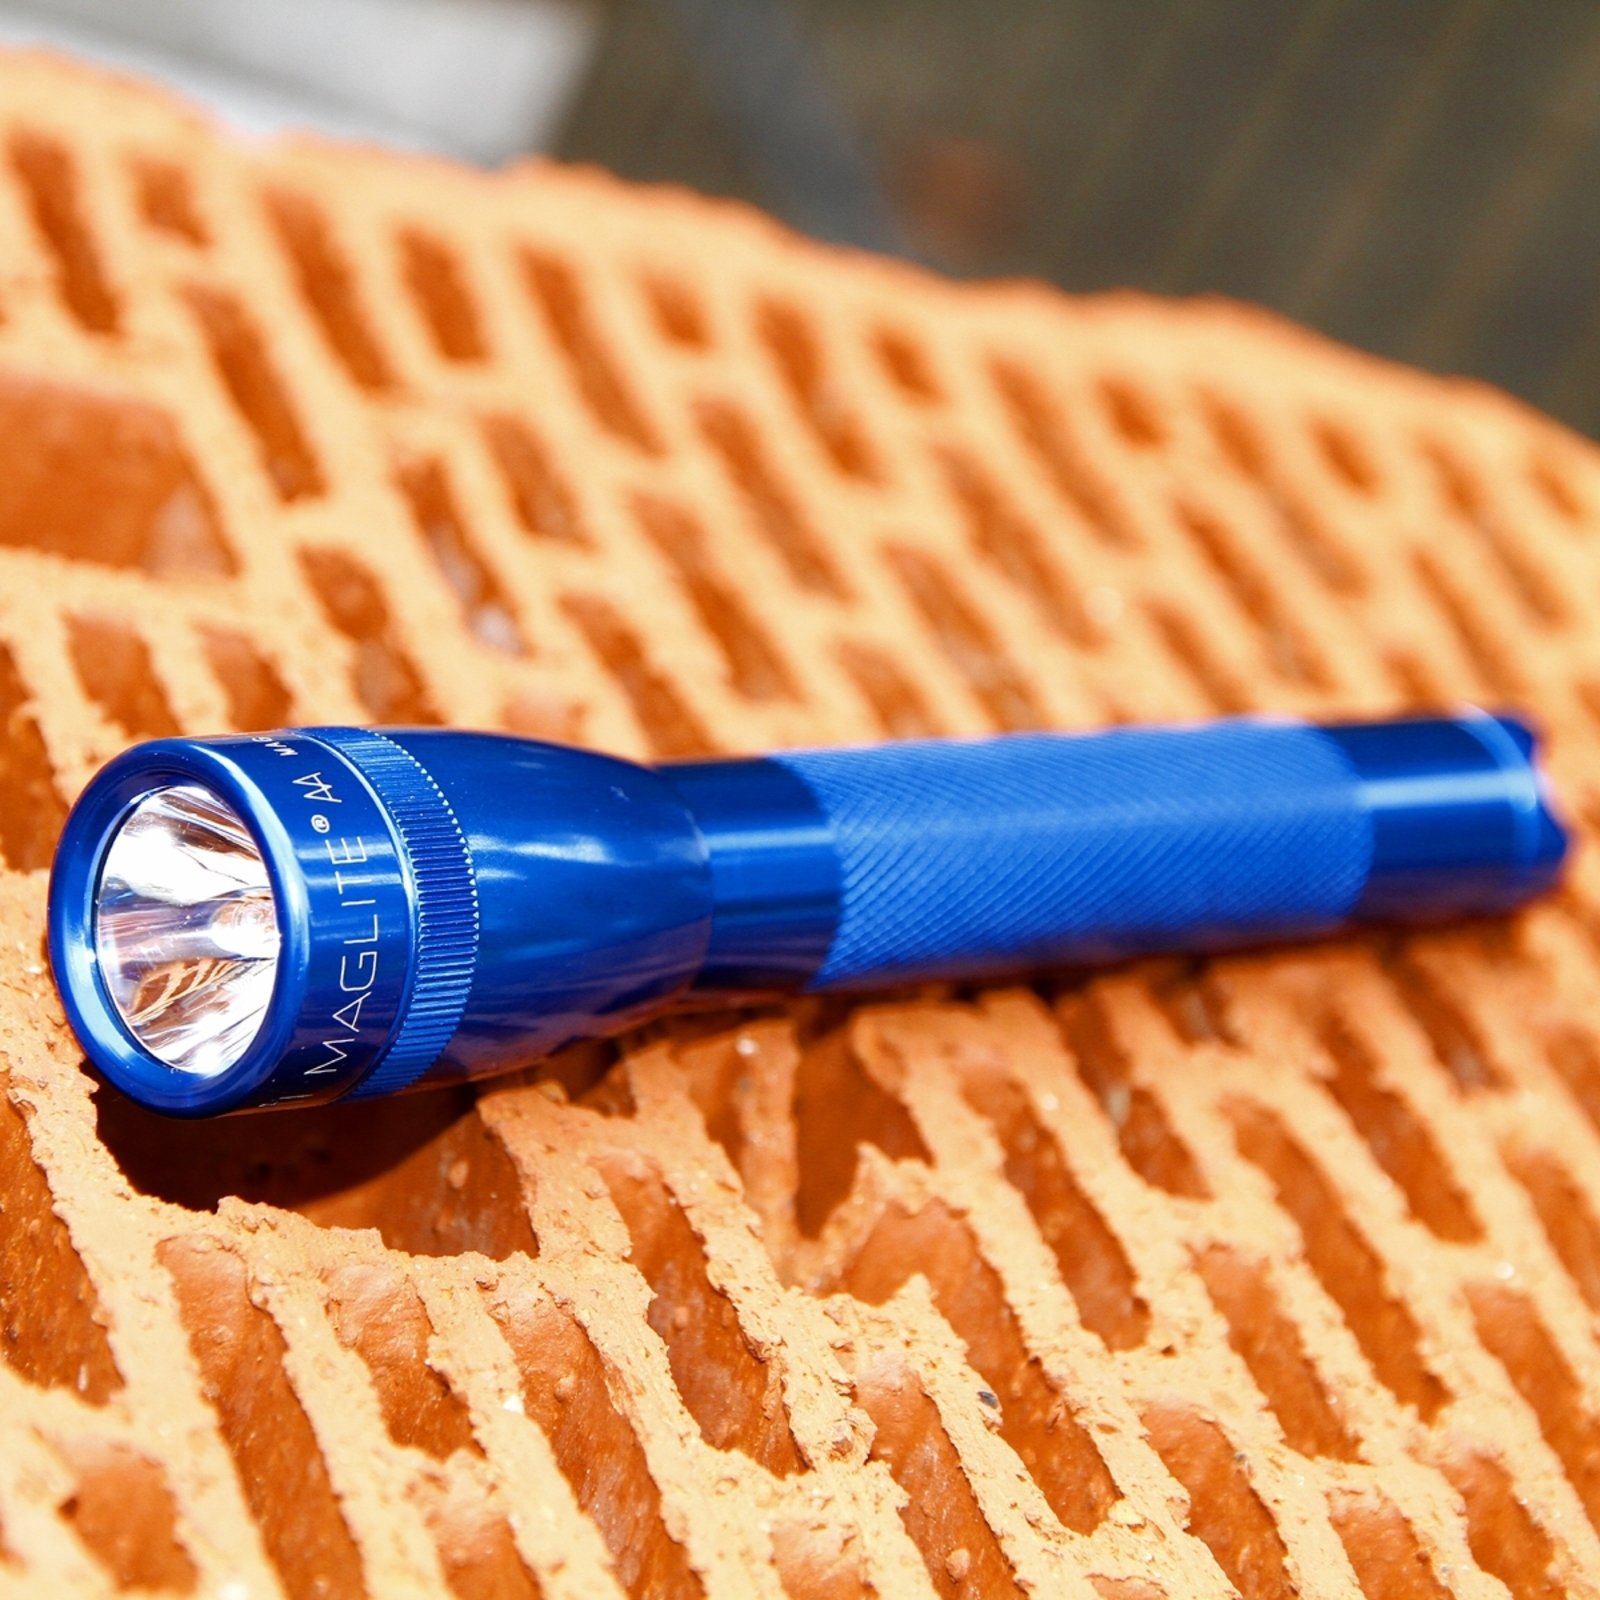 Handy torch Mini-Maglite 2AA cell, blue